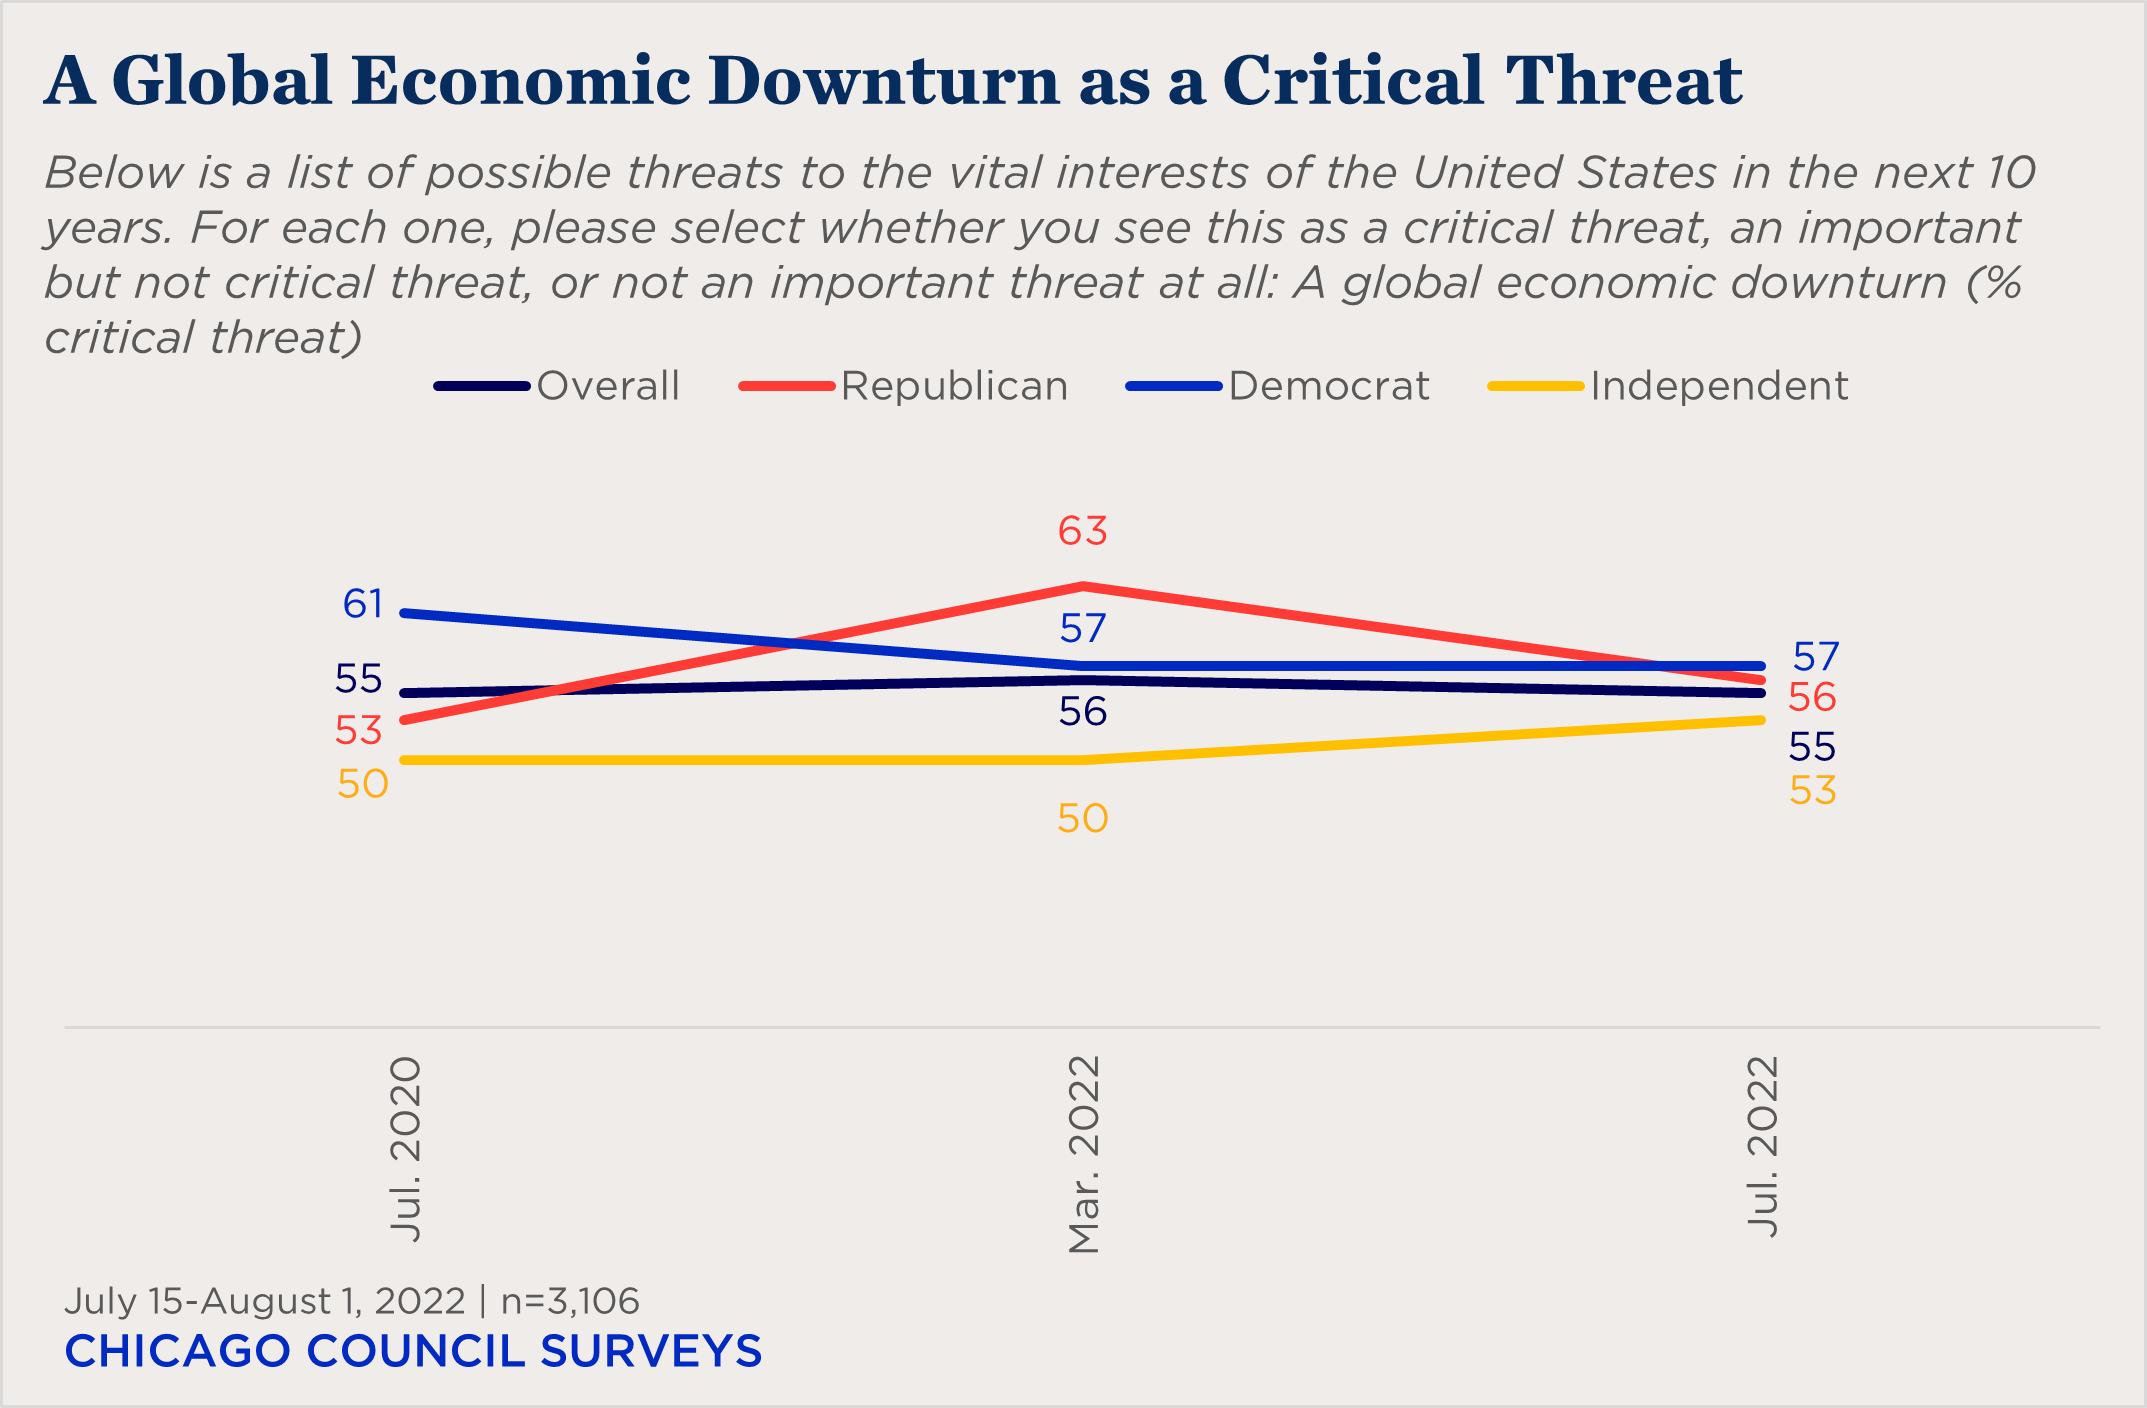 "line chart showing partisan views of a global economic downturn as a critical threat"